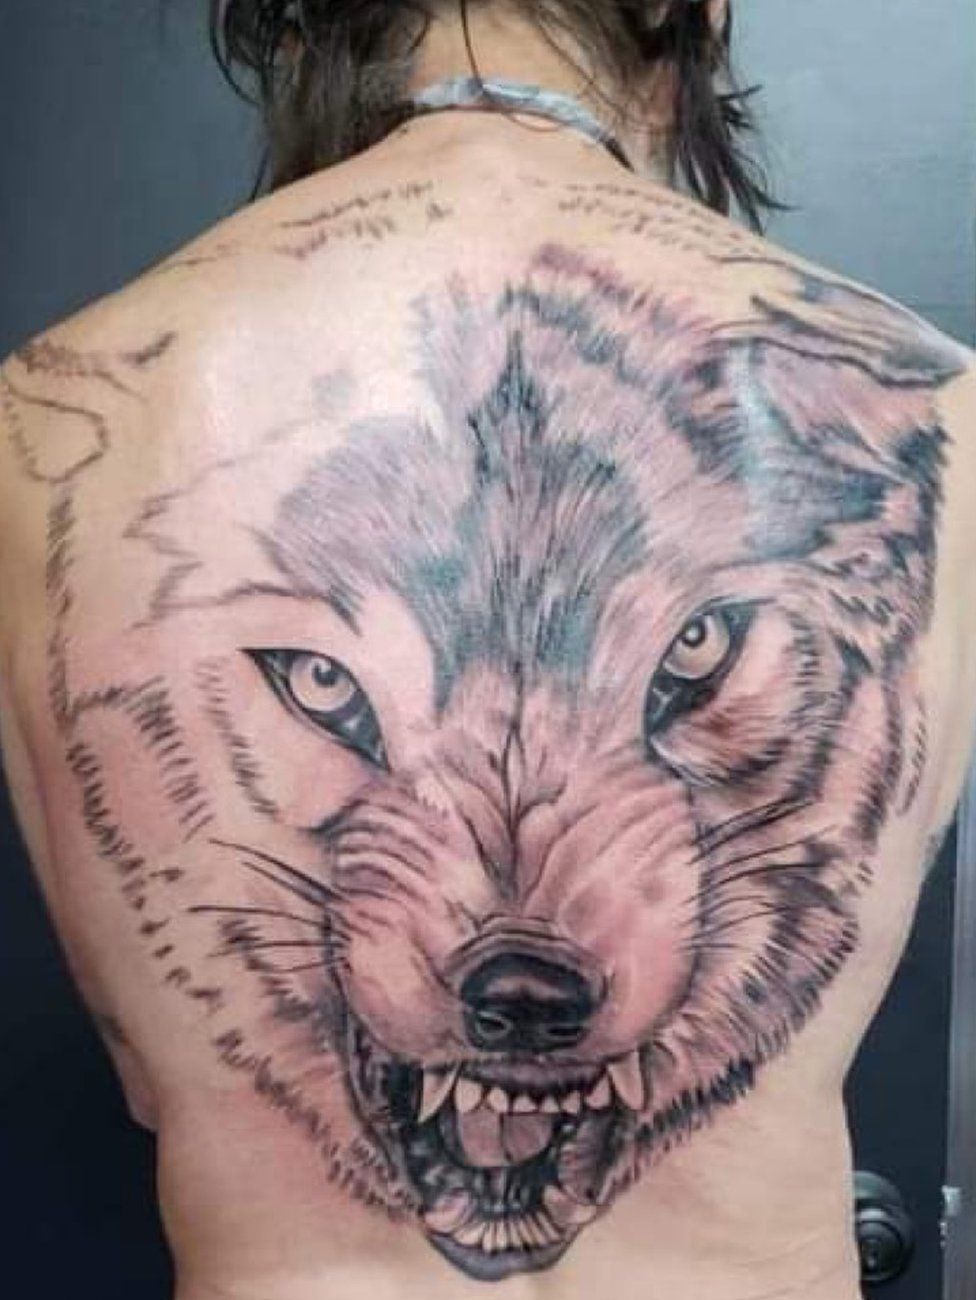 Avis sported a giant wolf tattoo across his back